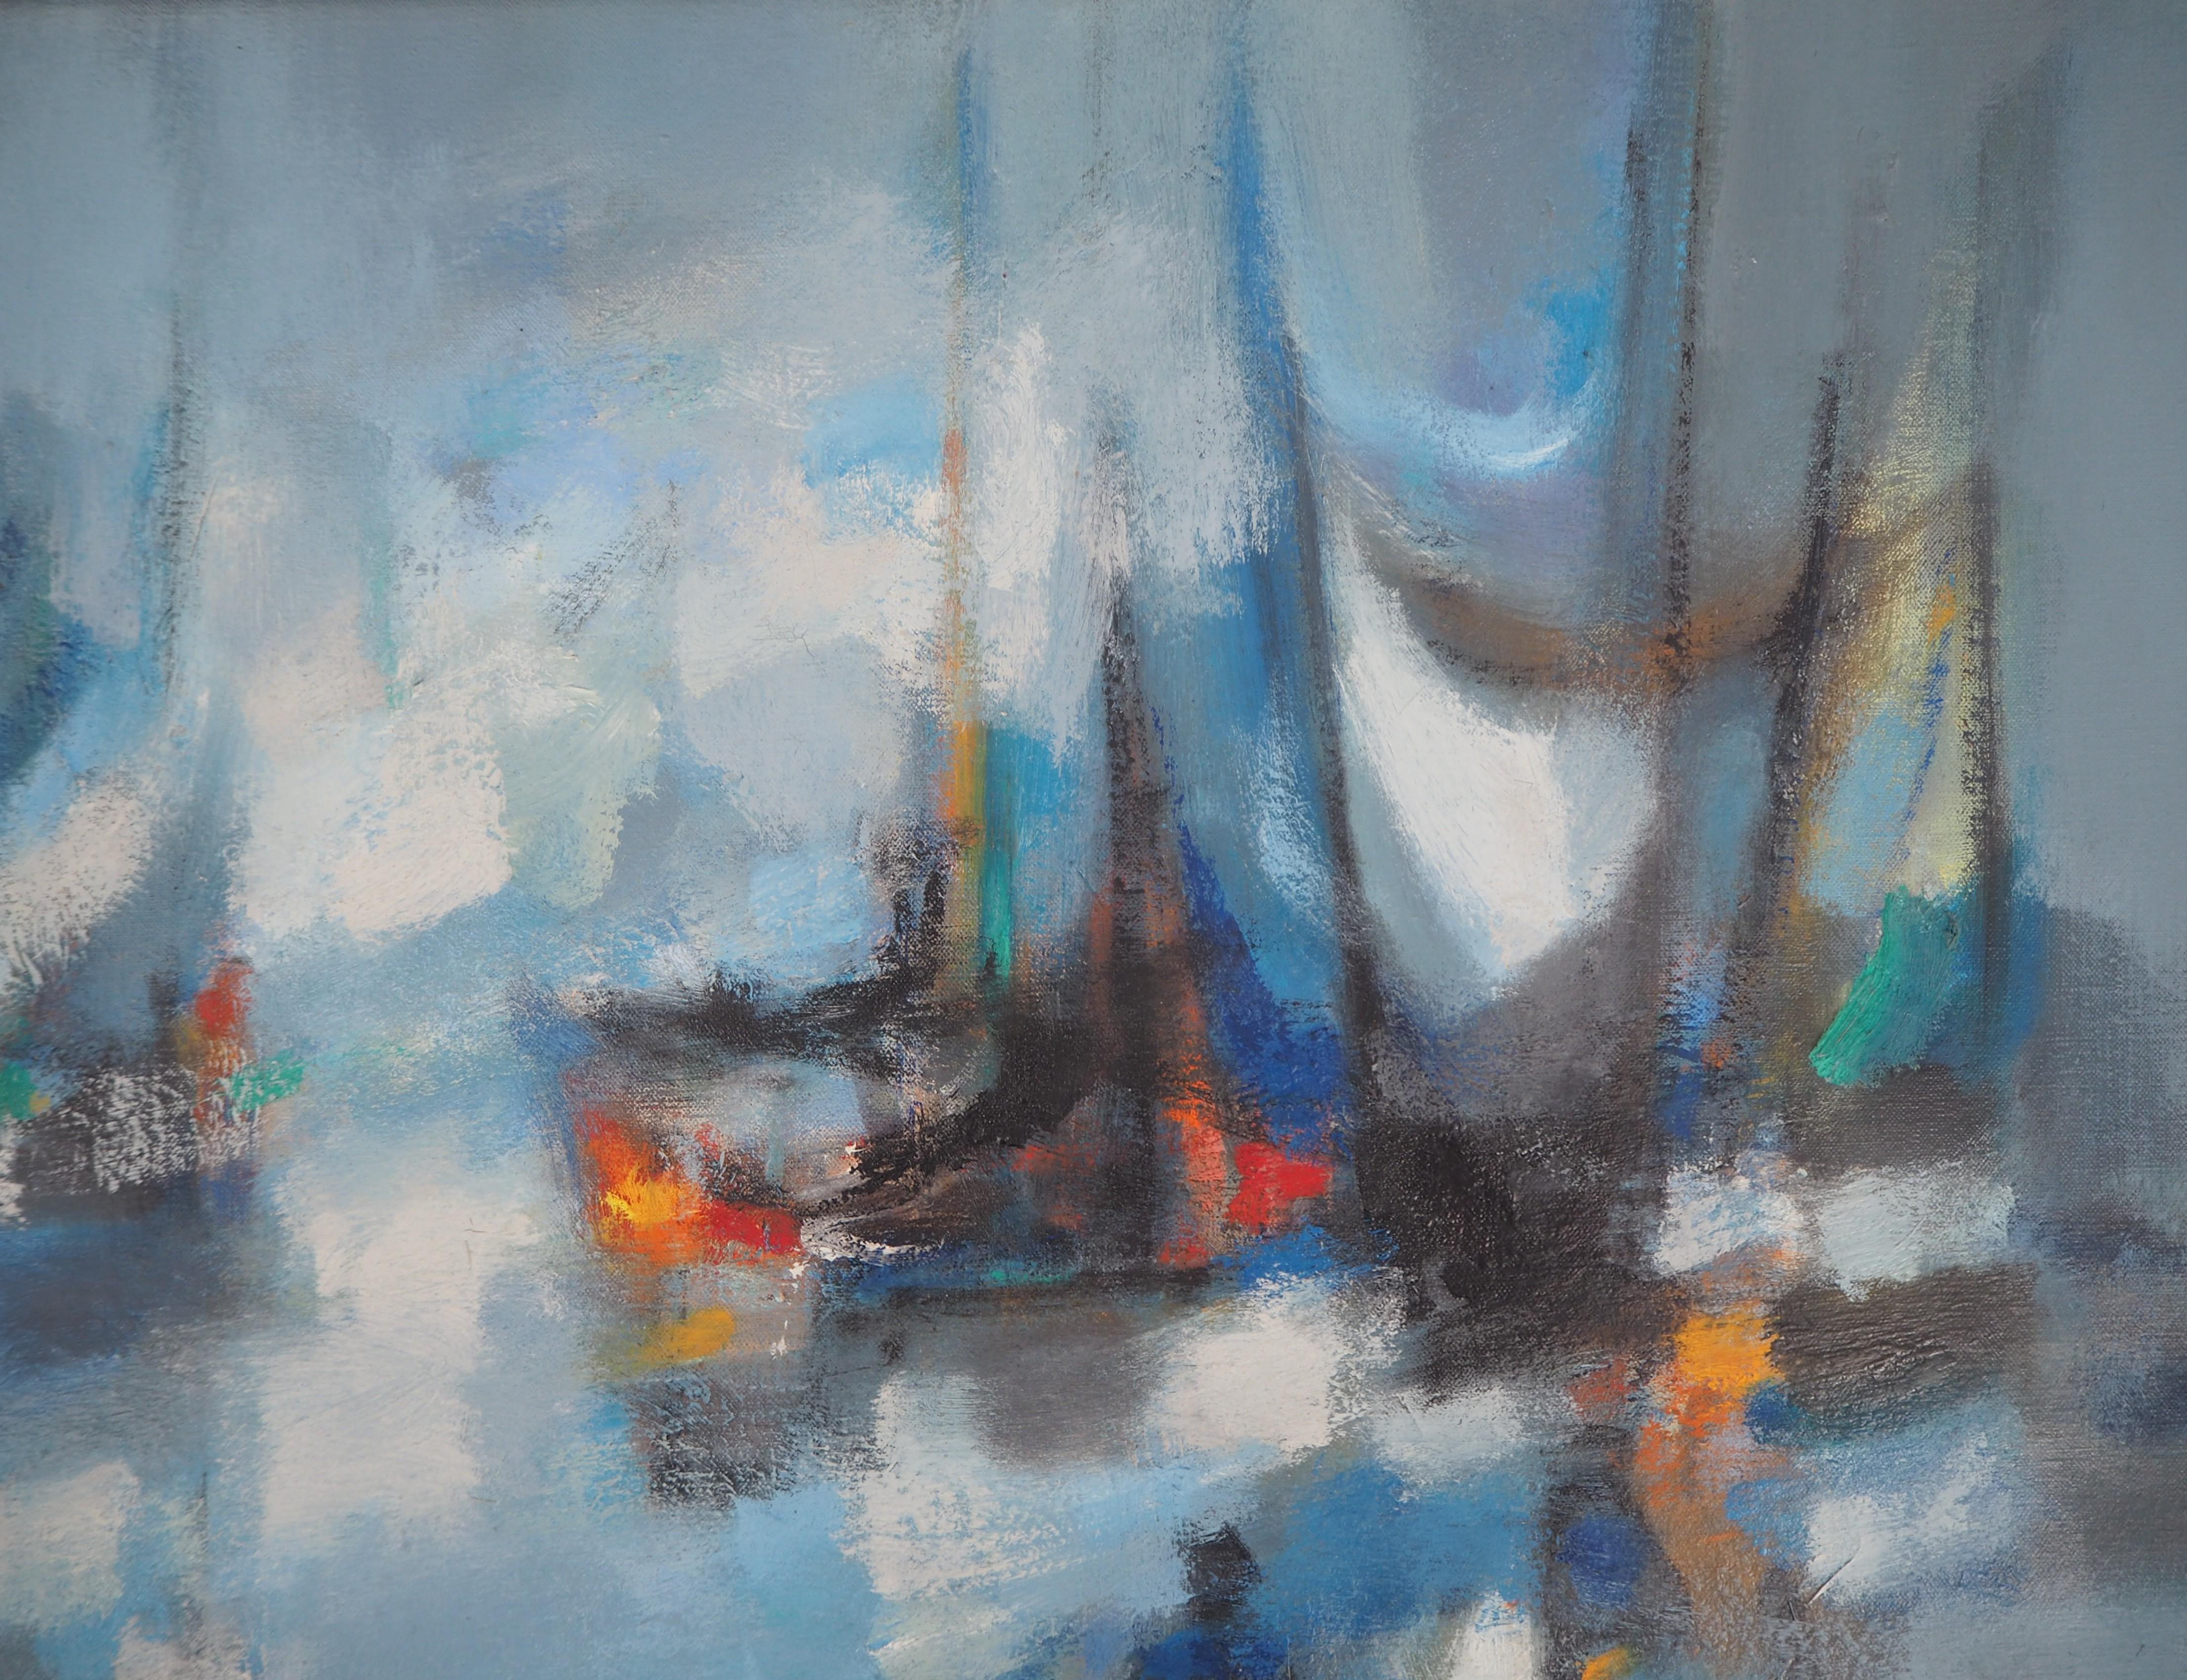 Boats : The Blue Sails - Original oil painting on canvas, Handsigned - Post-Impressionist Painting by Marcel Mouly